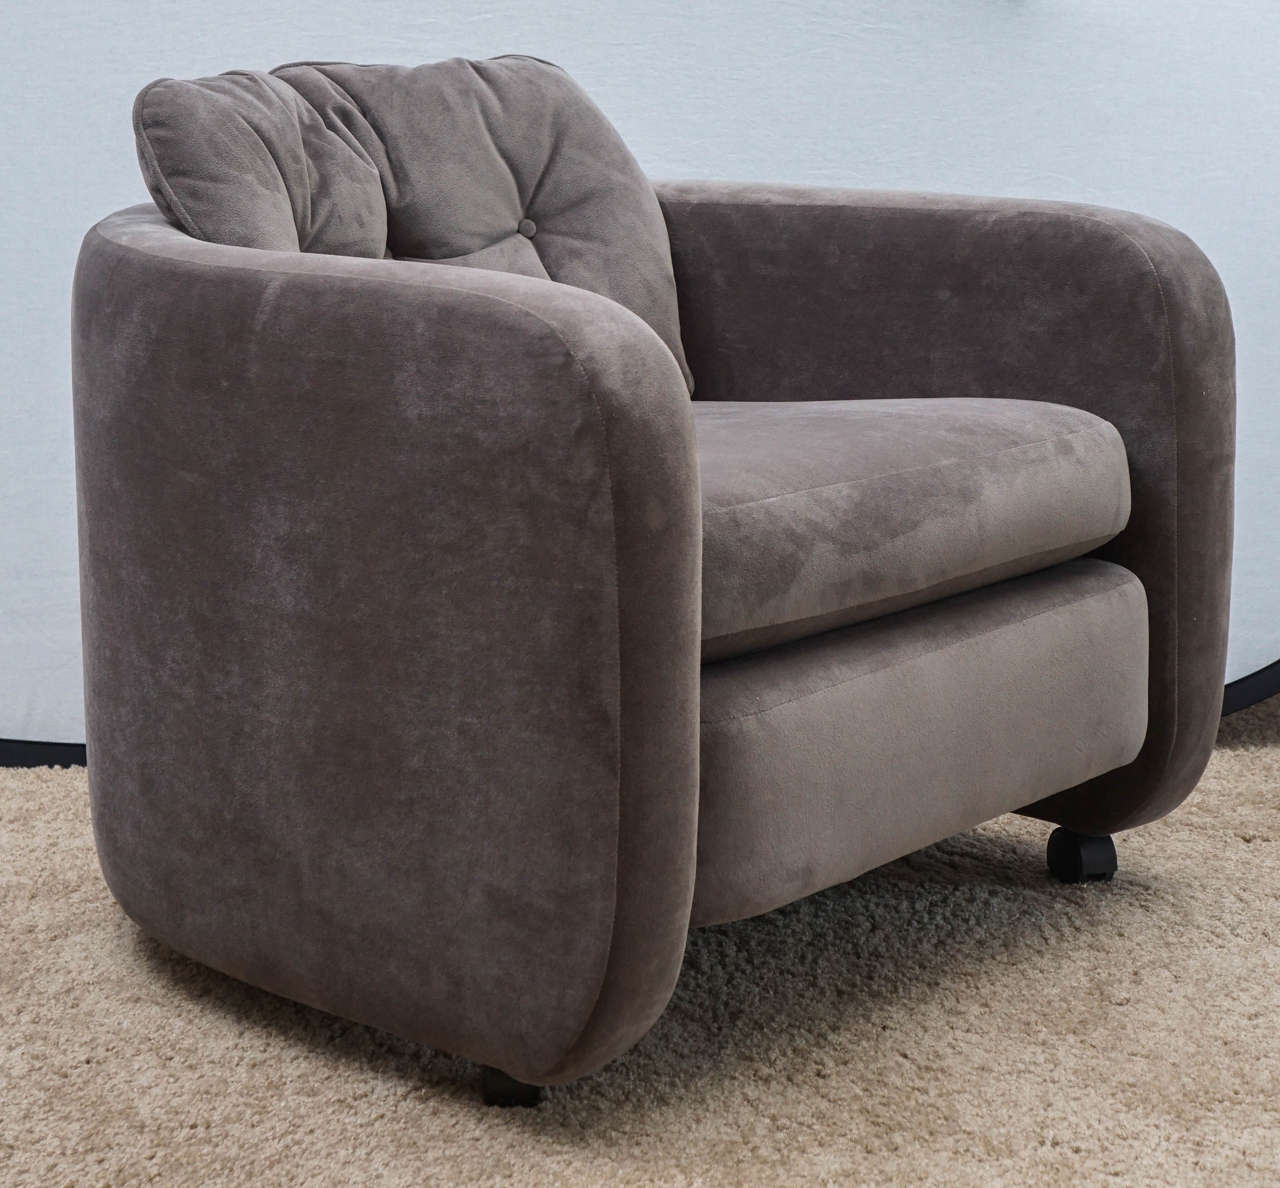 Stunning pair of comfy armchairs that invite you to 